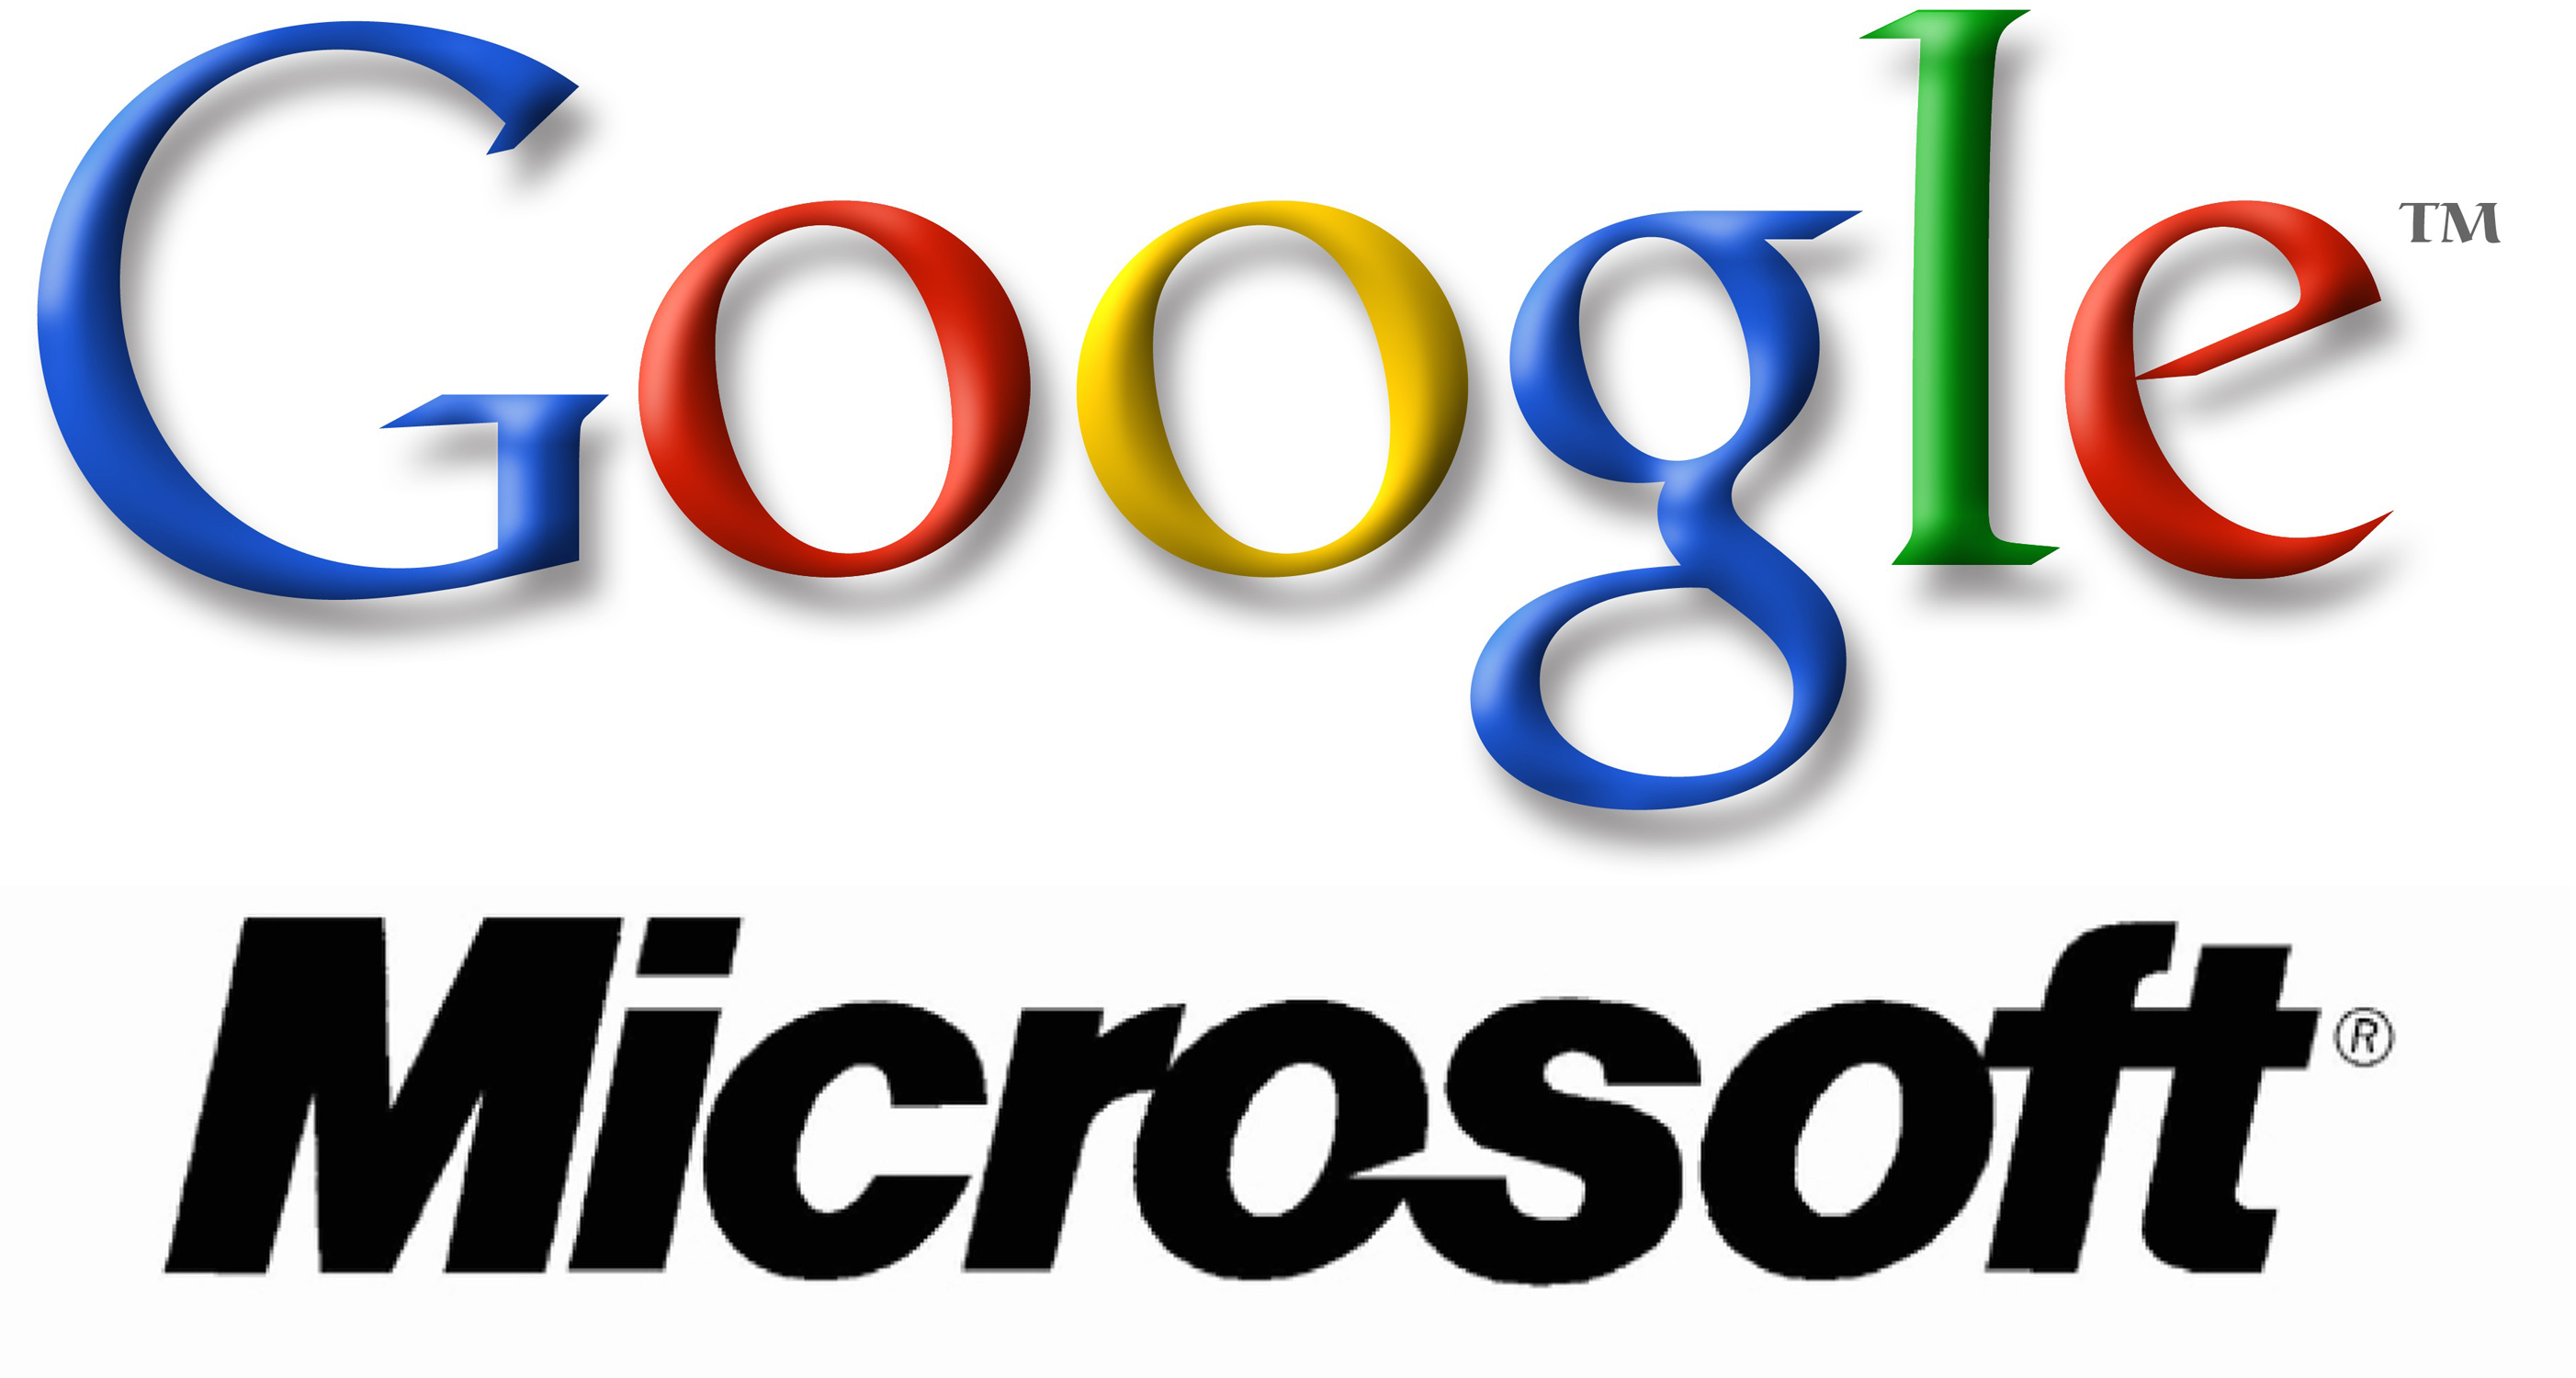 Google Claim Microsoft to Earn $94B From Their Patent